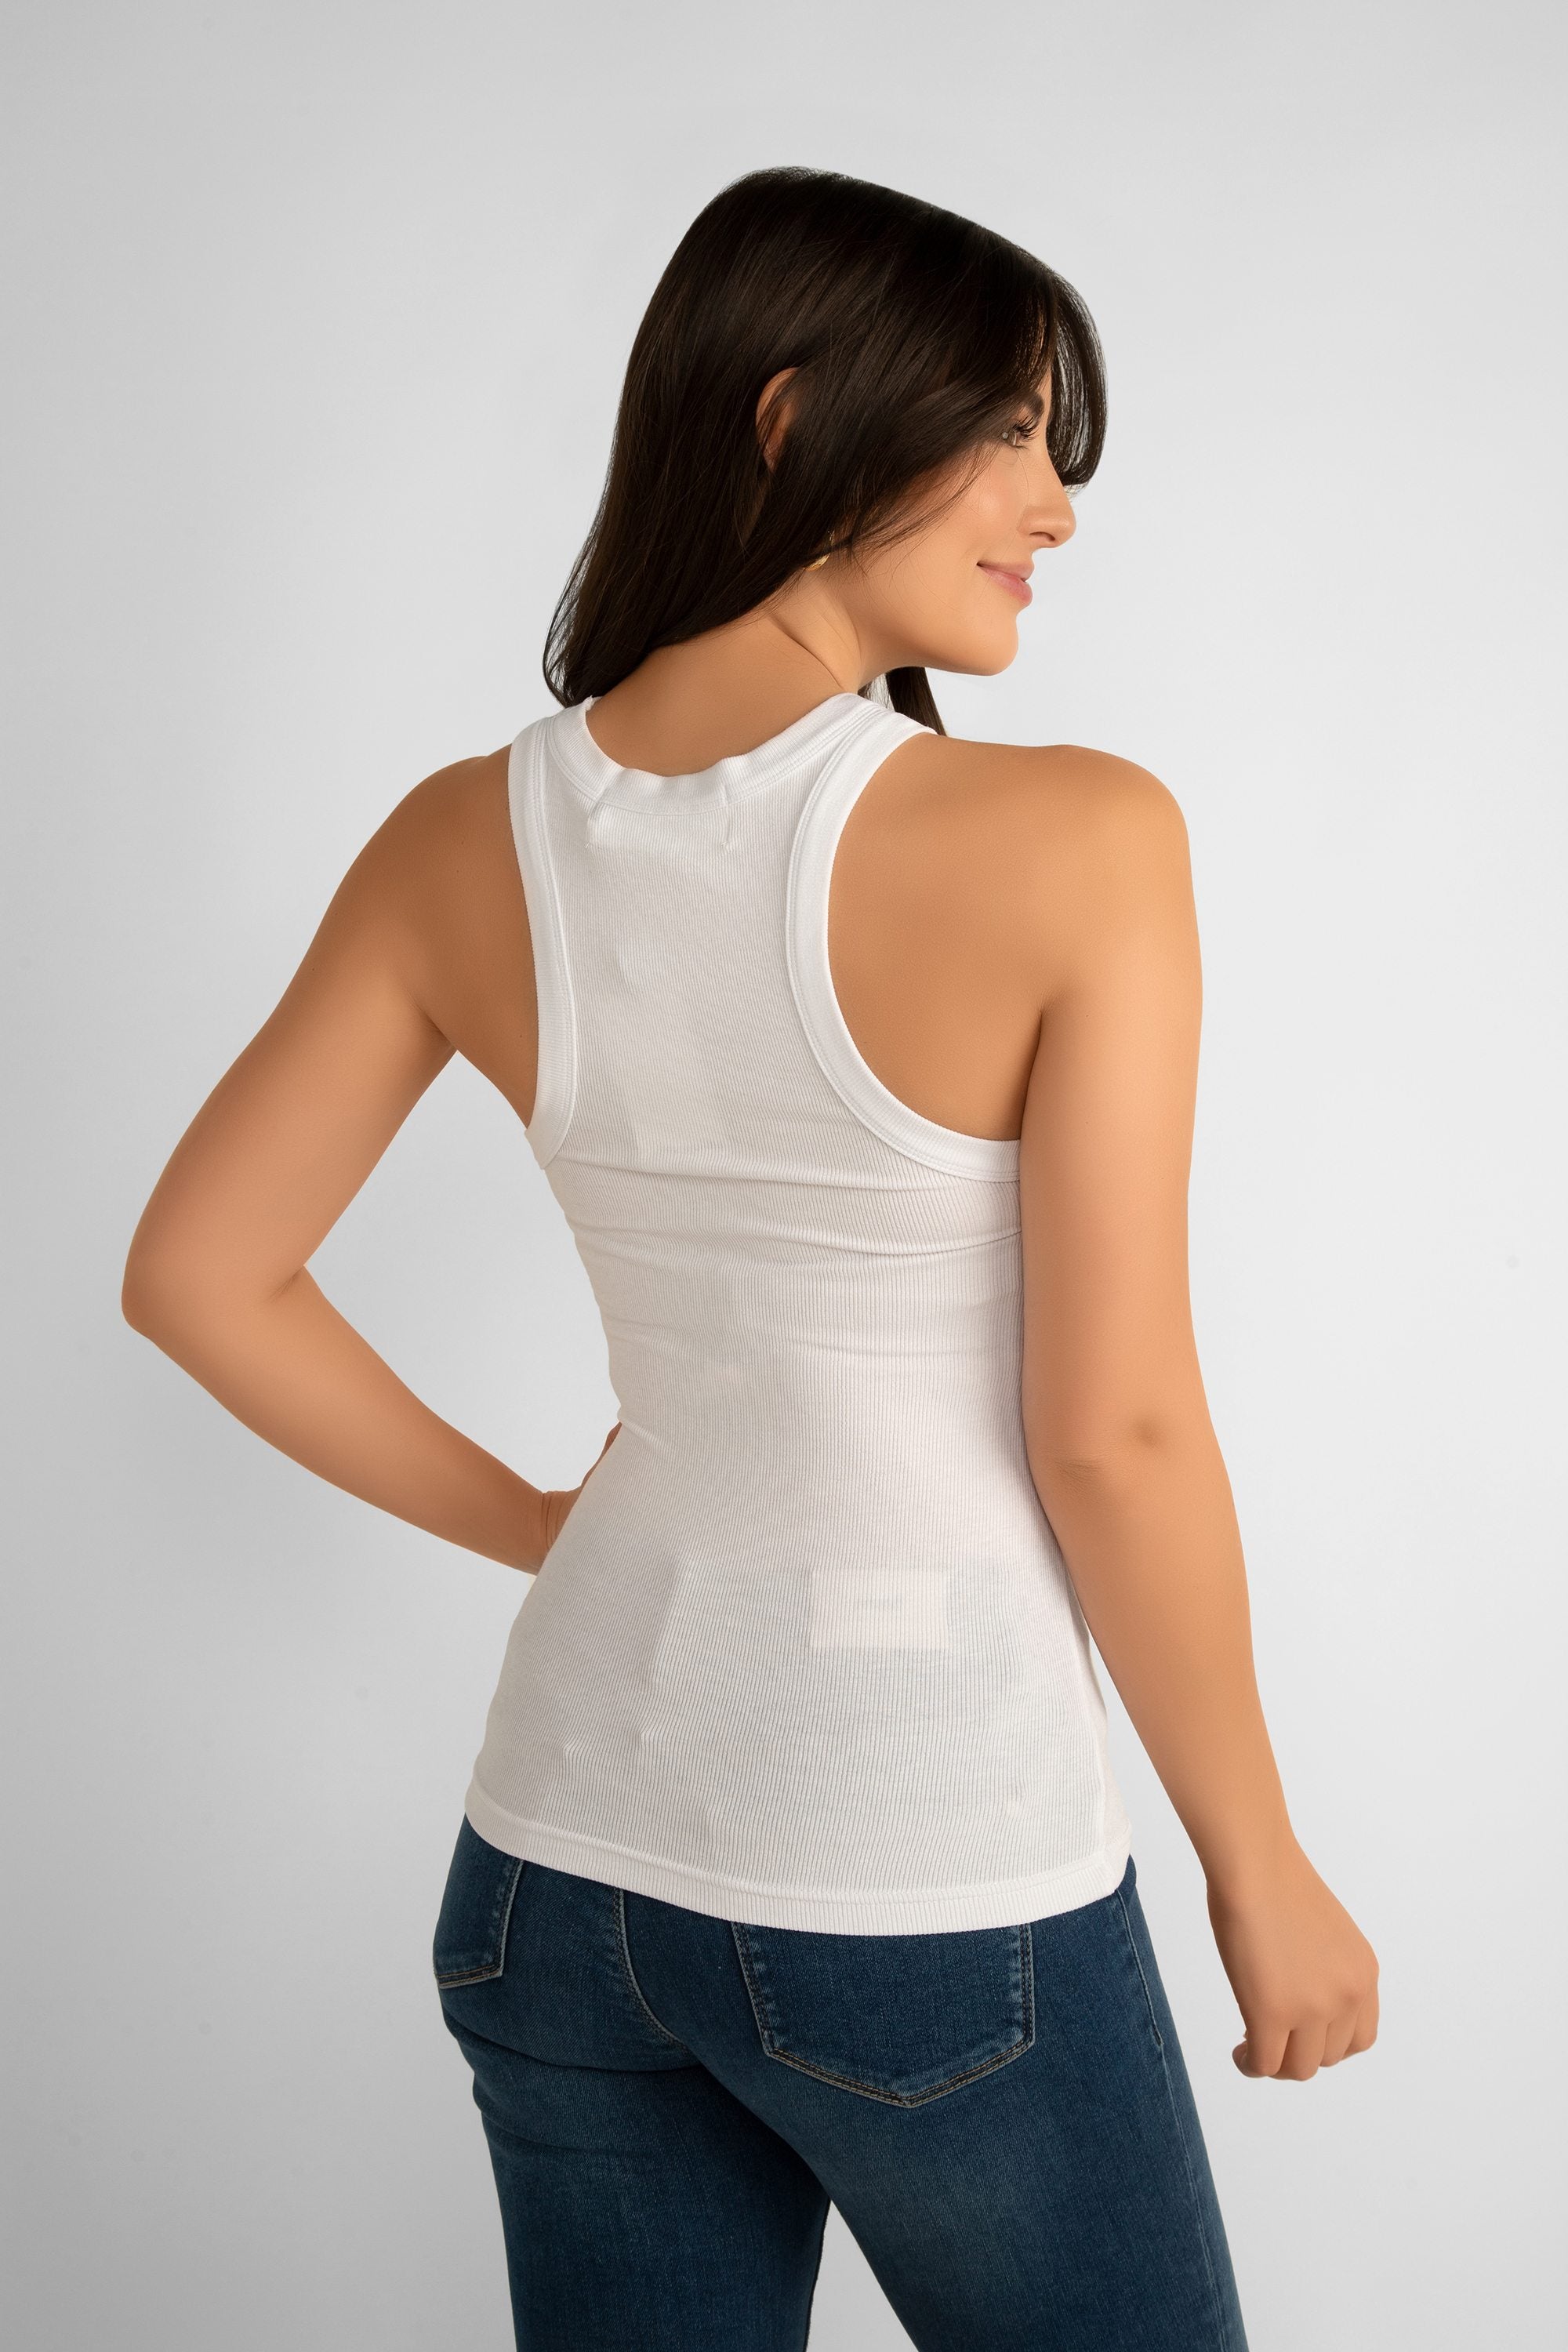 Back view of Pink Martini (TO-679542) The Danika Top - Women's Classic Ribbed Knit, Racerback Tank Top in White